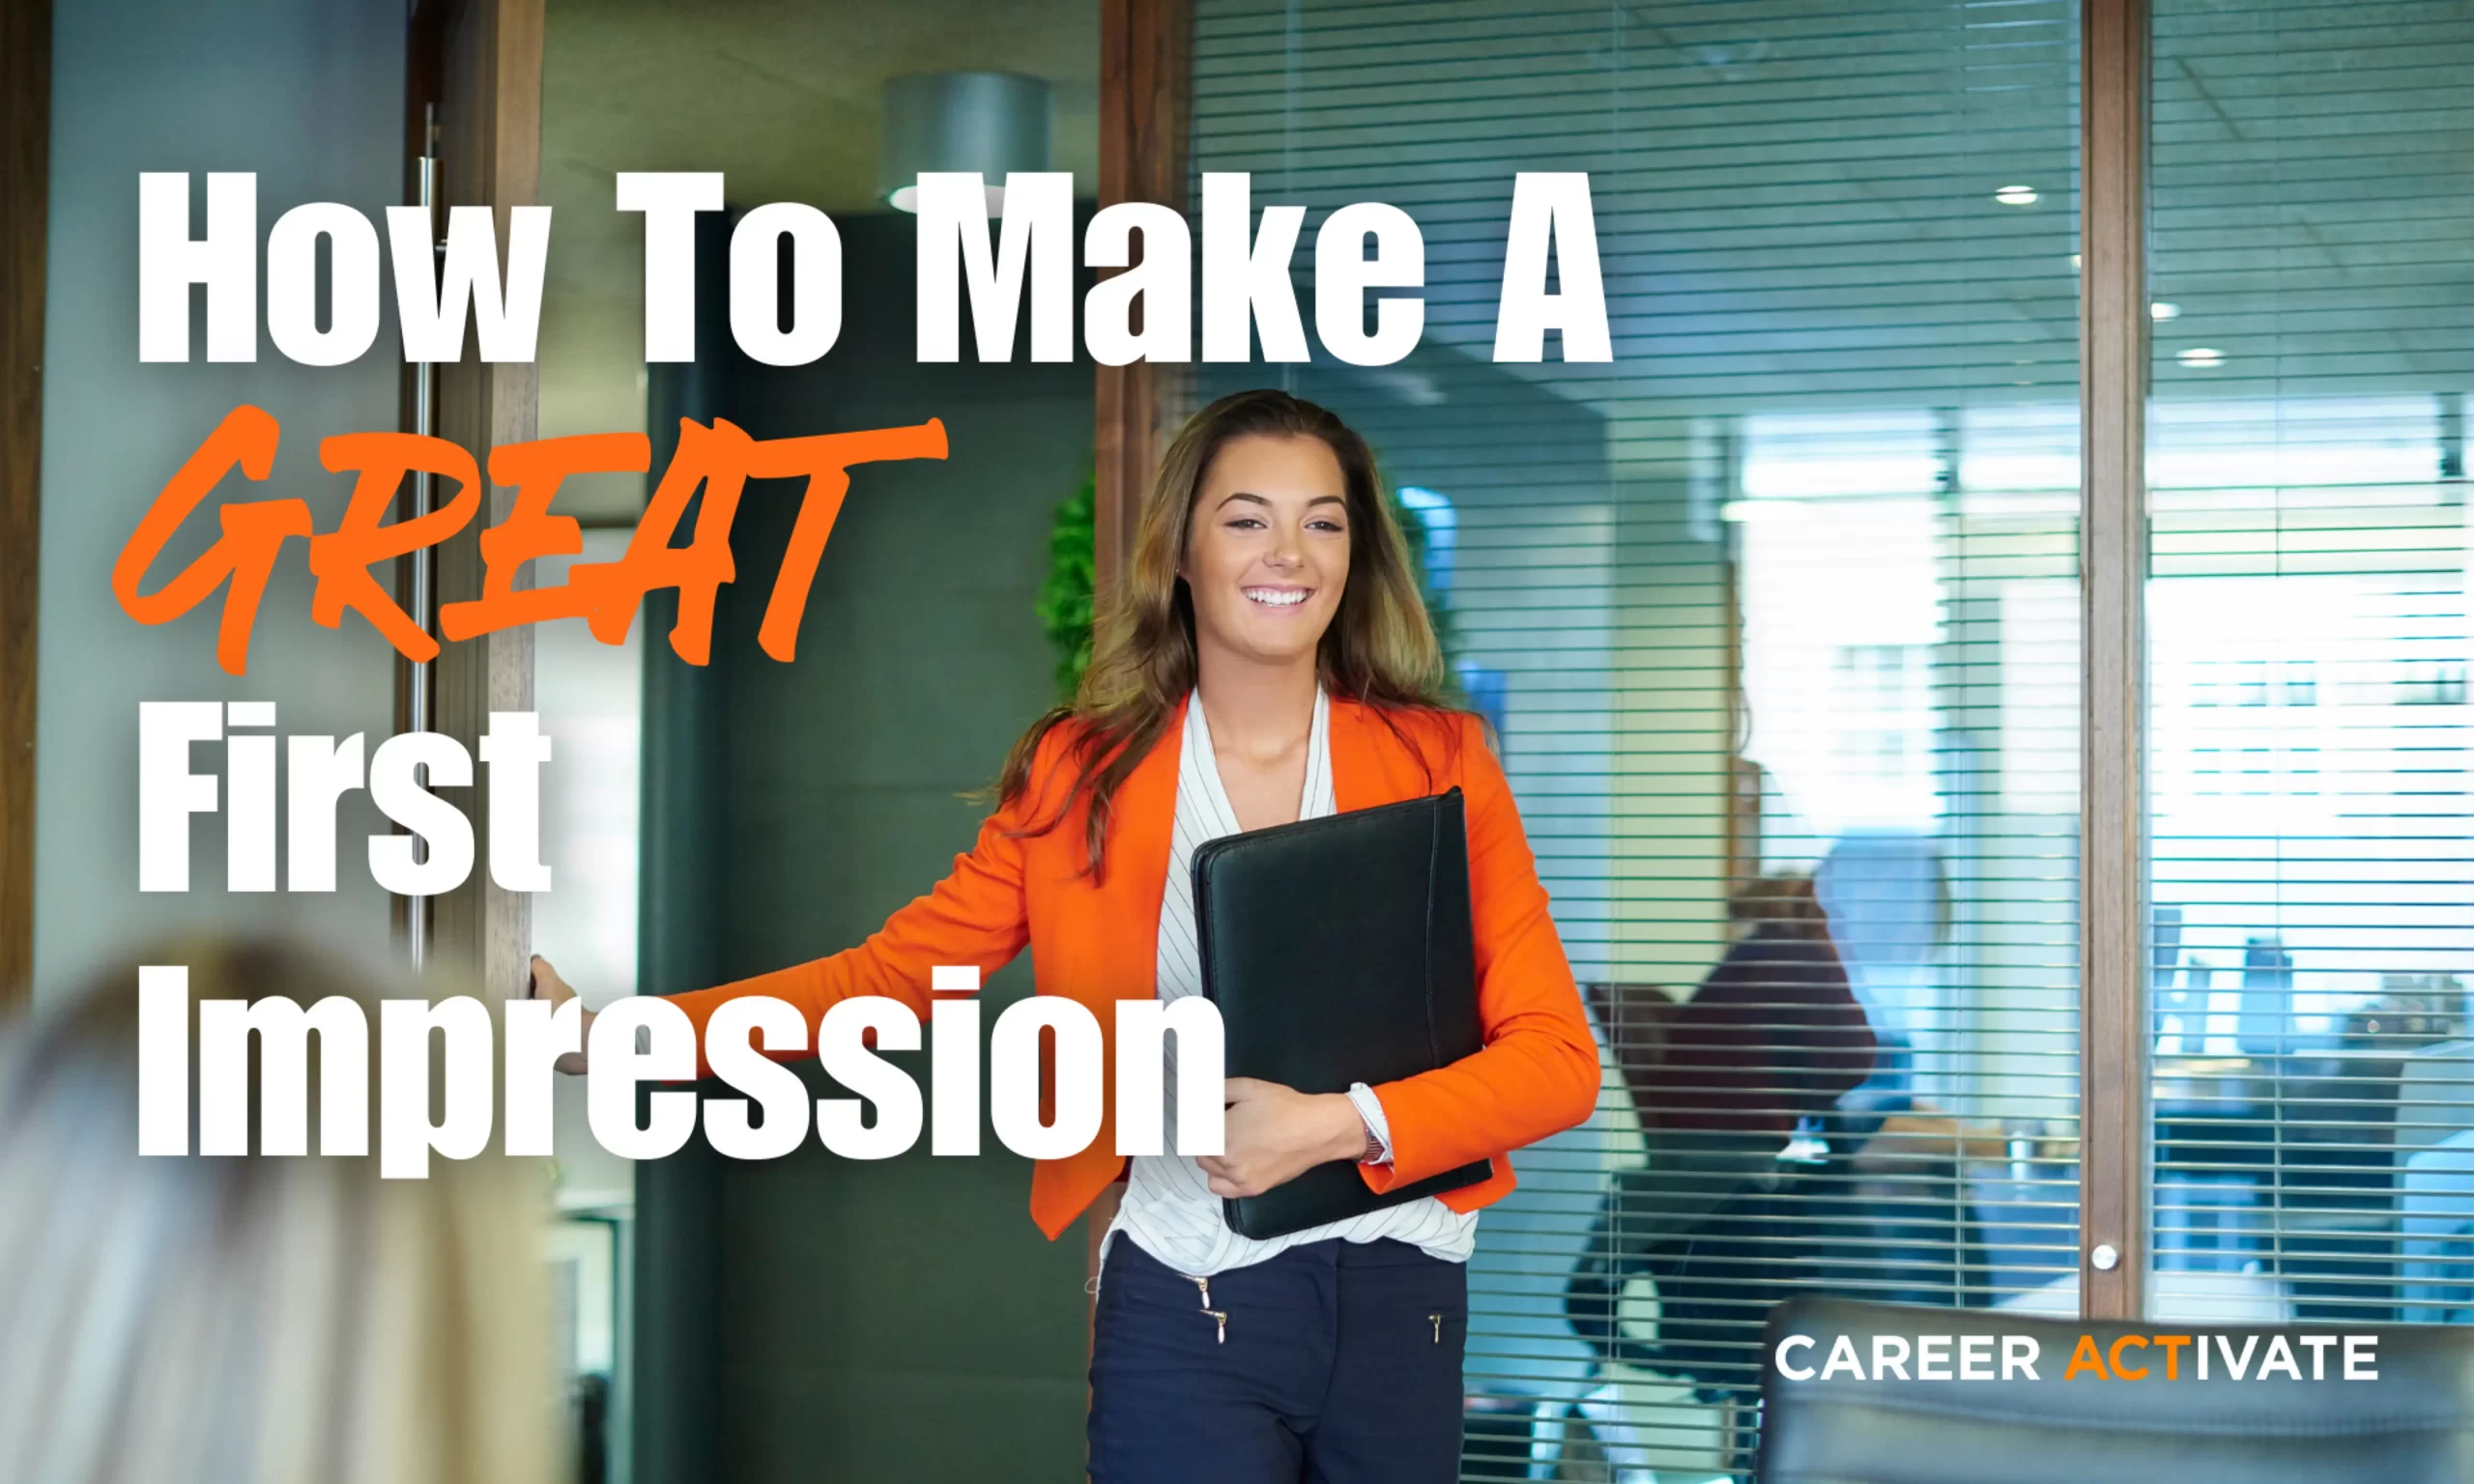 How To Make A GREAT First Impression